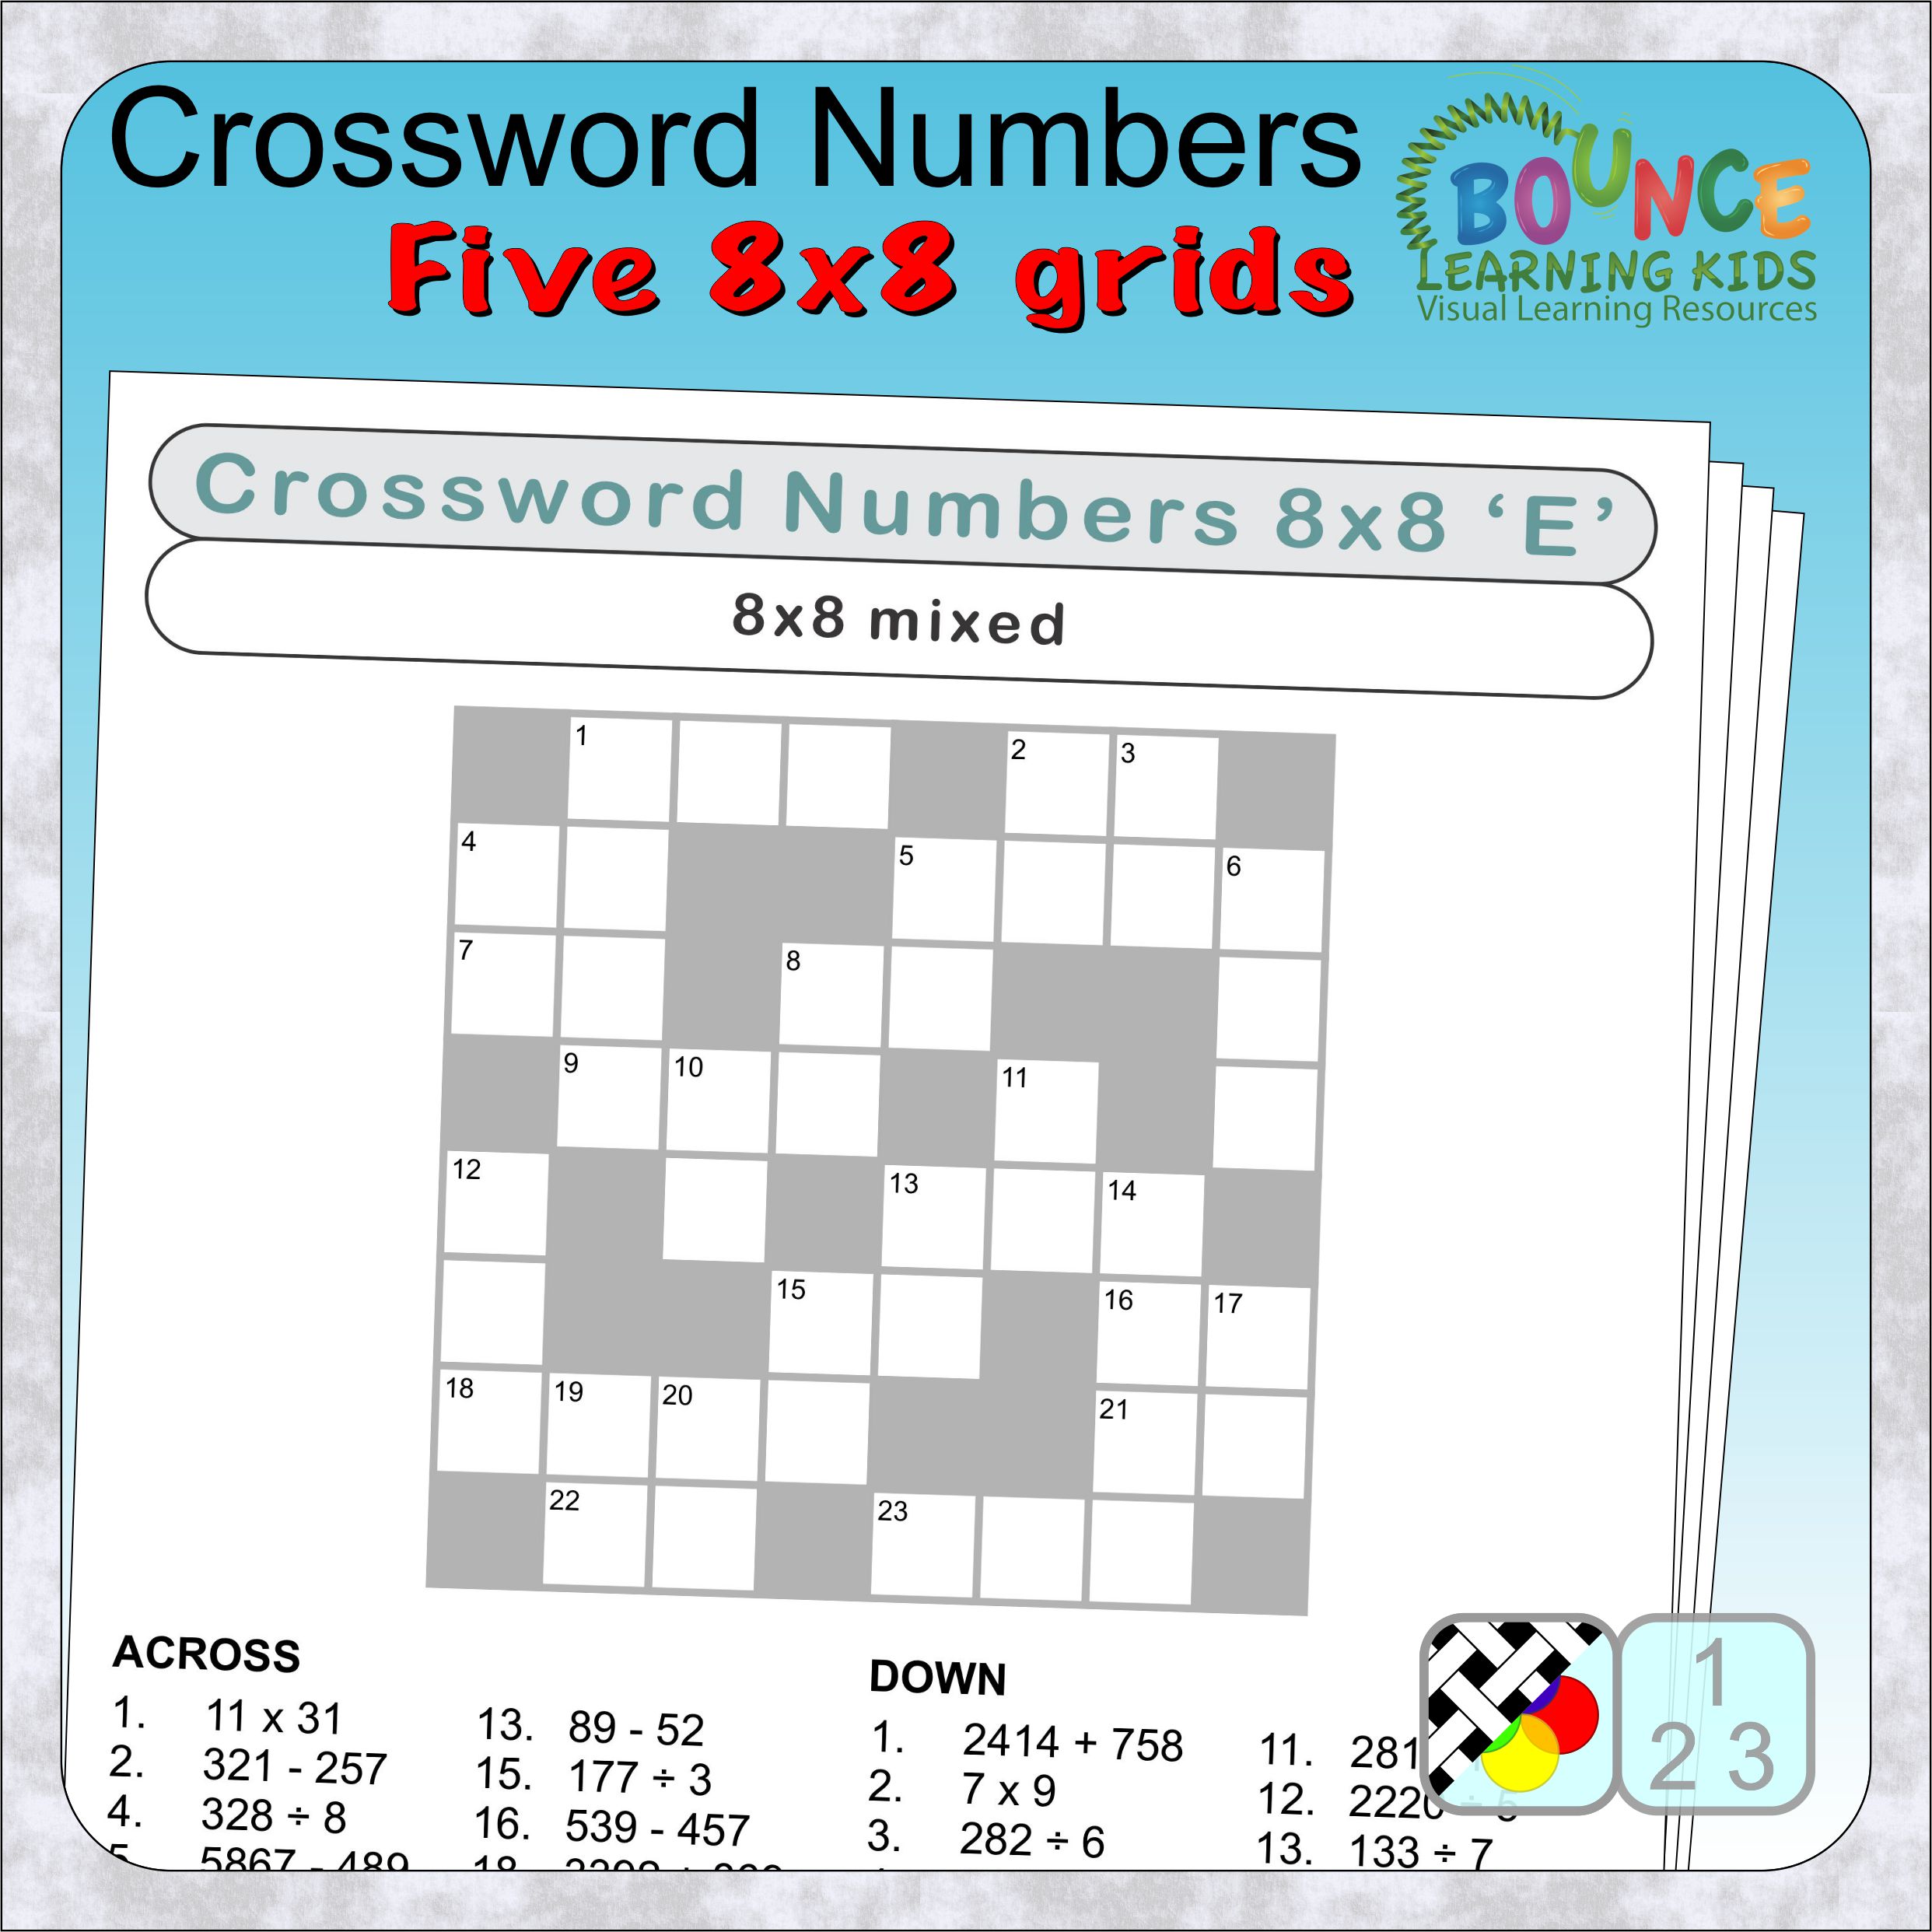 6-great-crossword-numbers-worksheets-8x8-with-answers